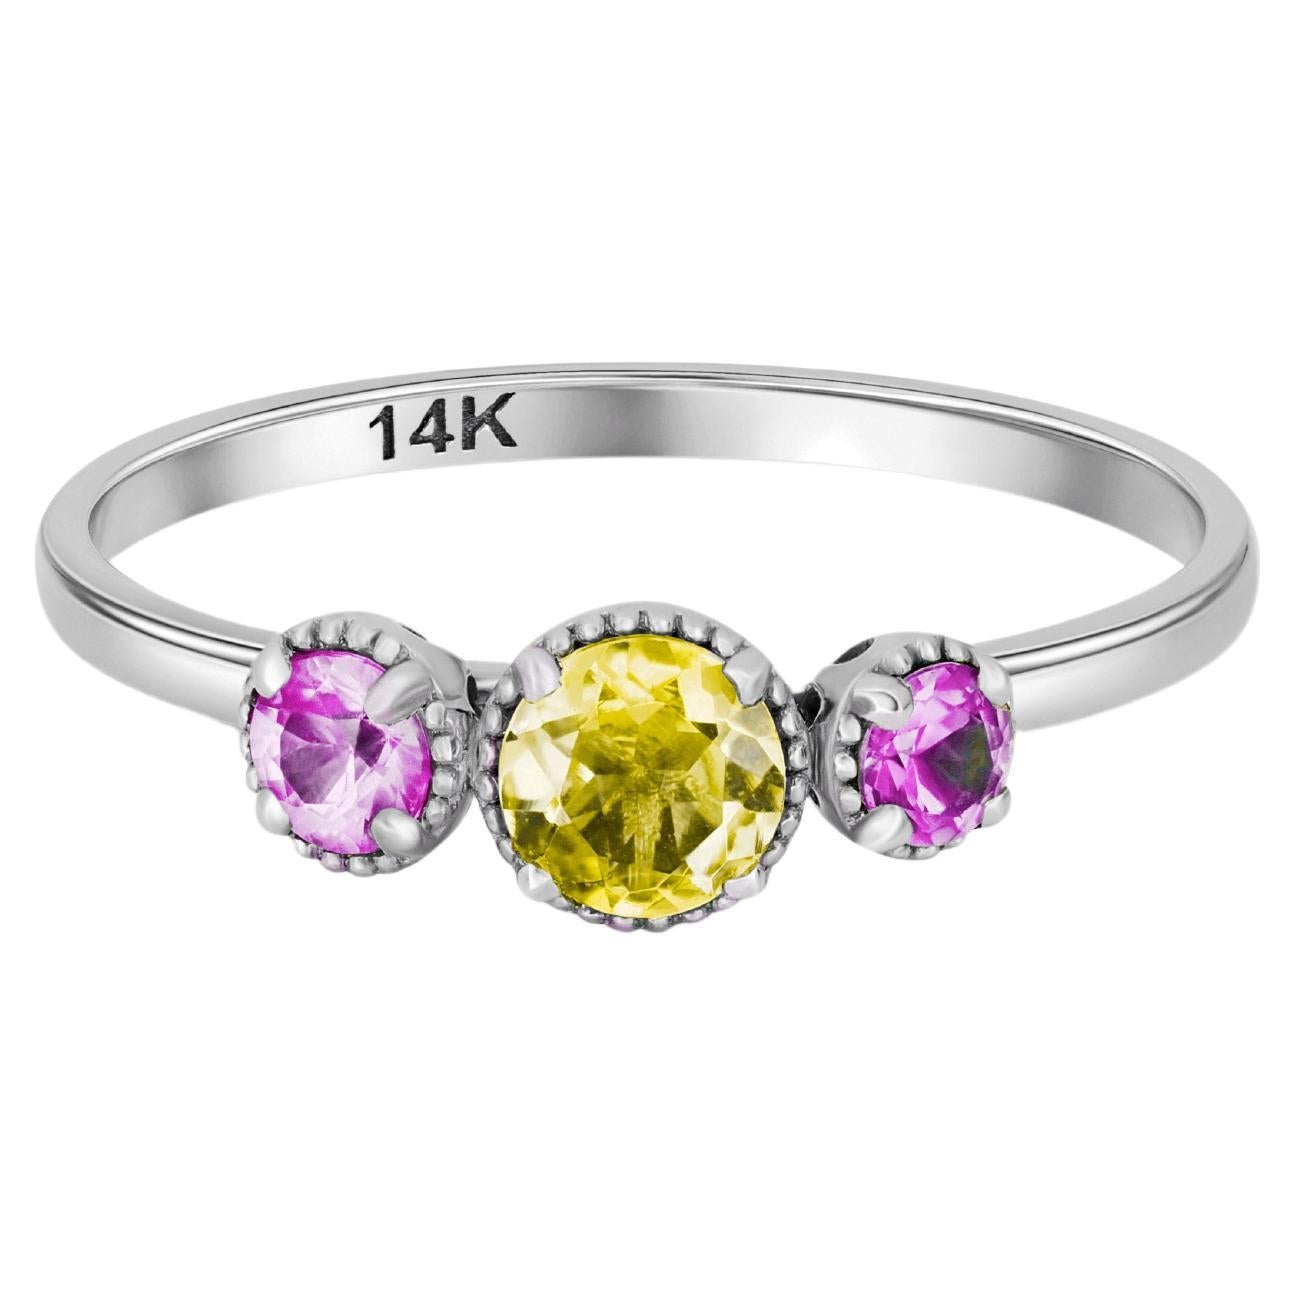 Trio gems 14k gold ring. For Sale